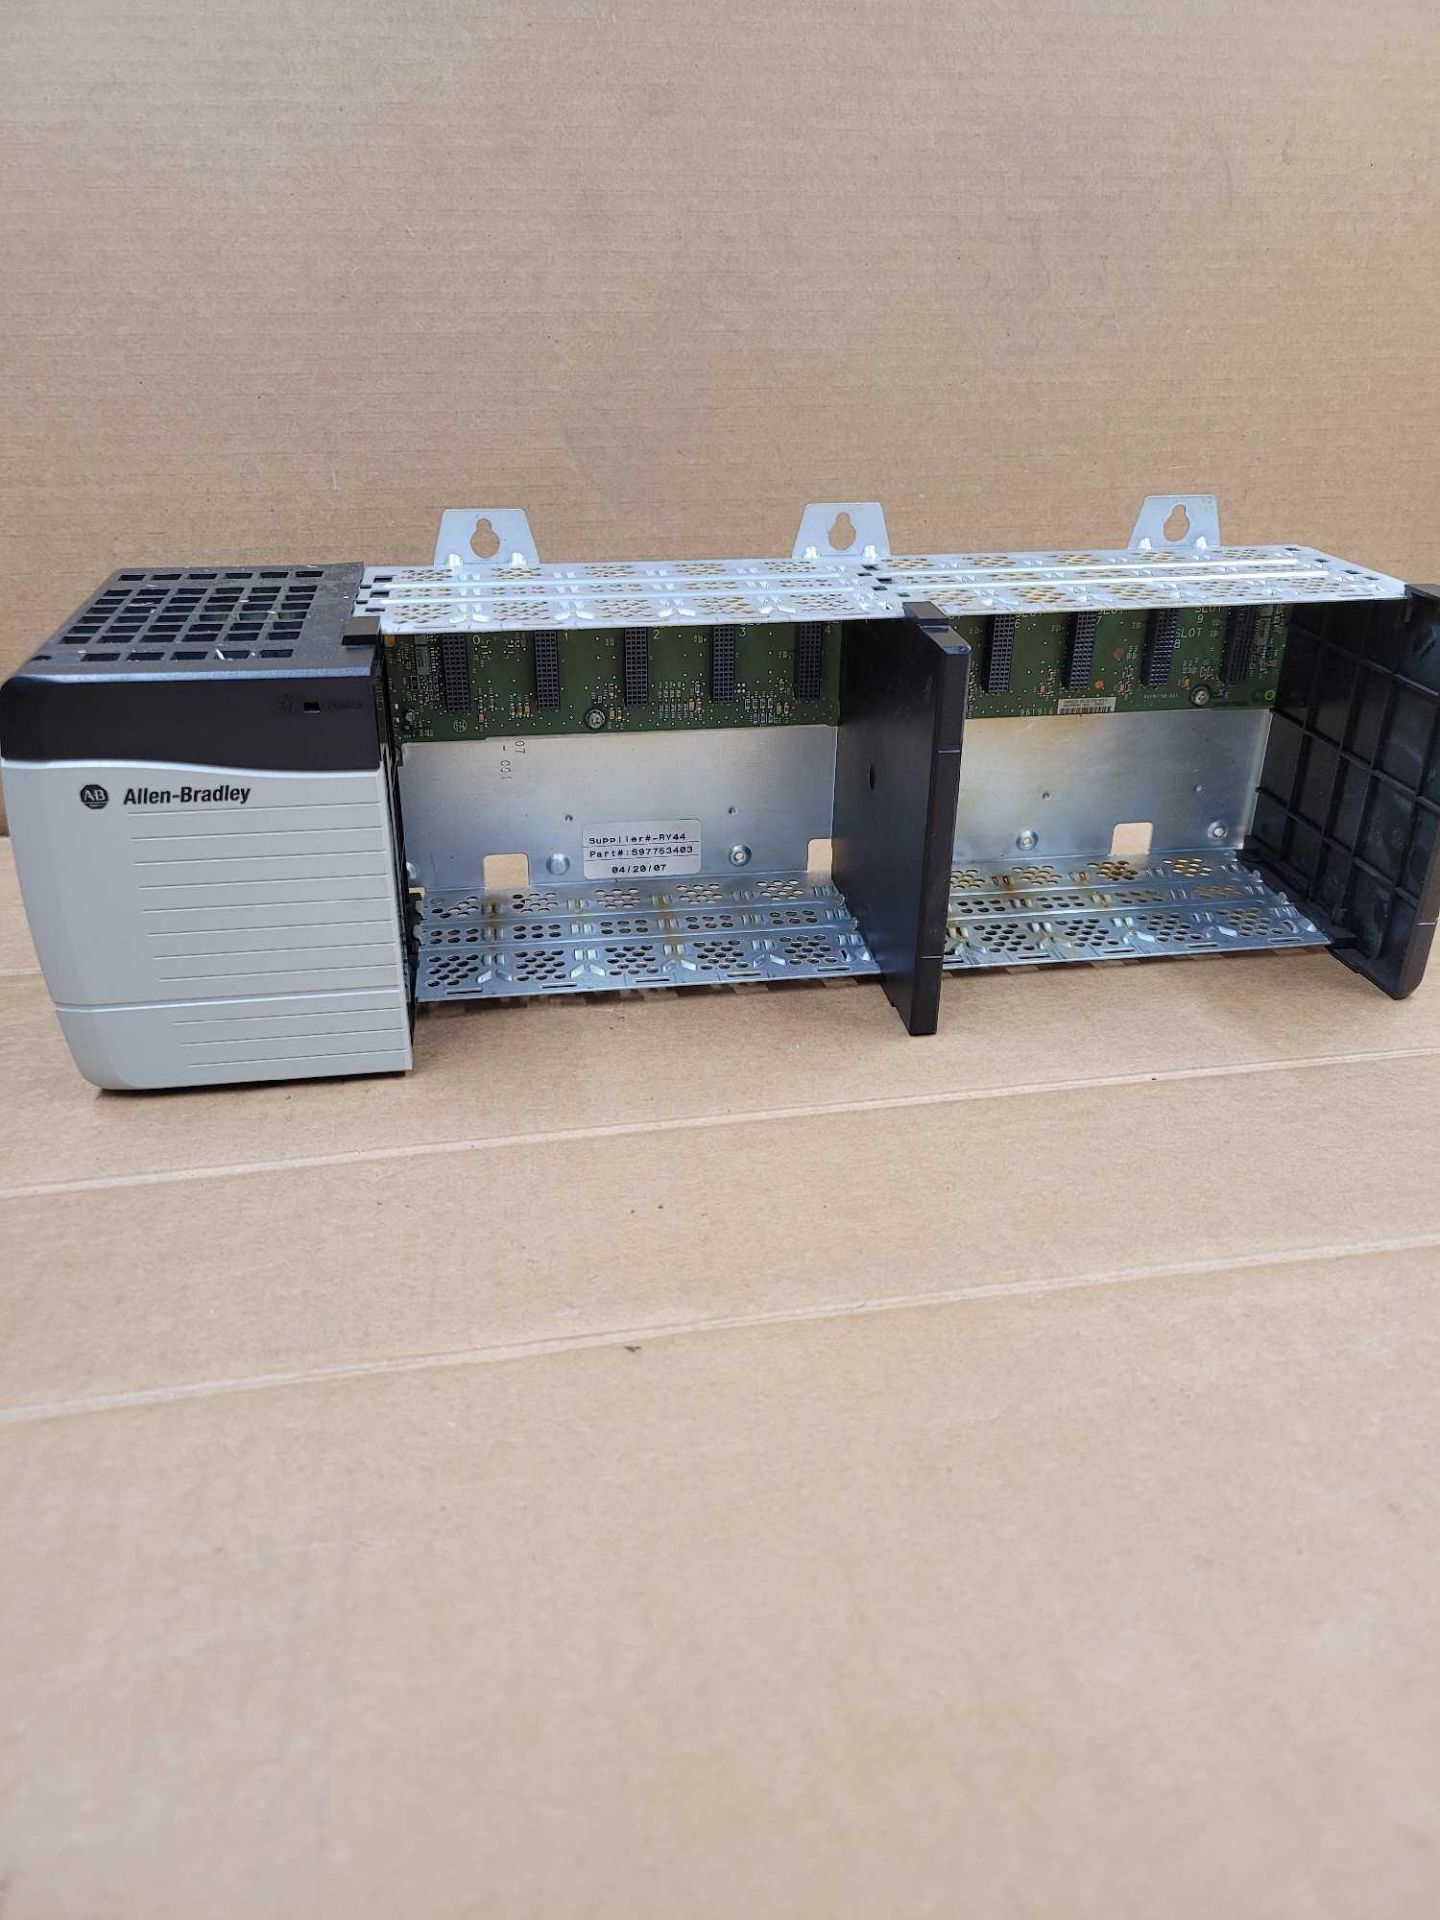 ALLEN BRADLEY 1756-PA75 with 1756-A10 / Series B ControlLogix Power Supply with Series B 10 Slot PLC